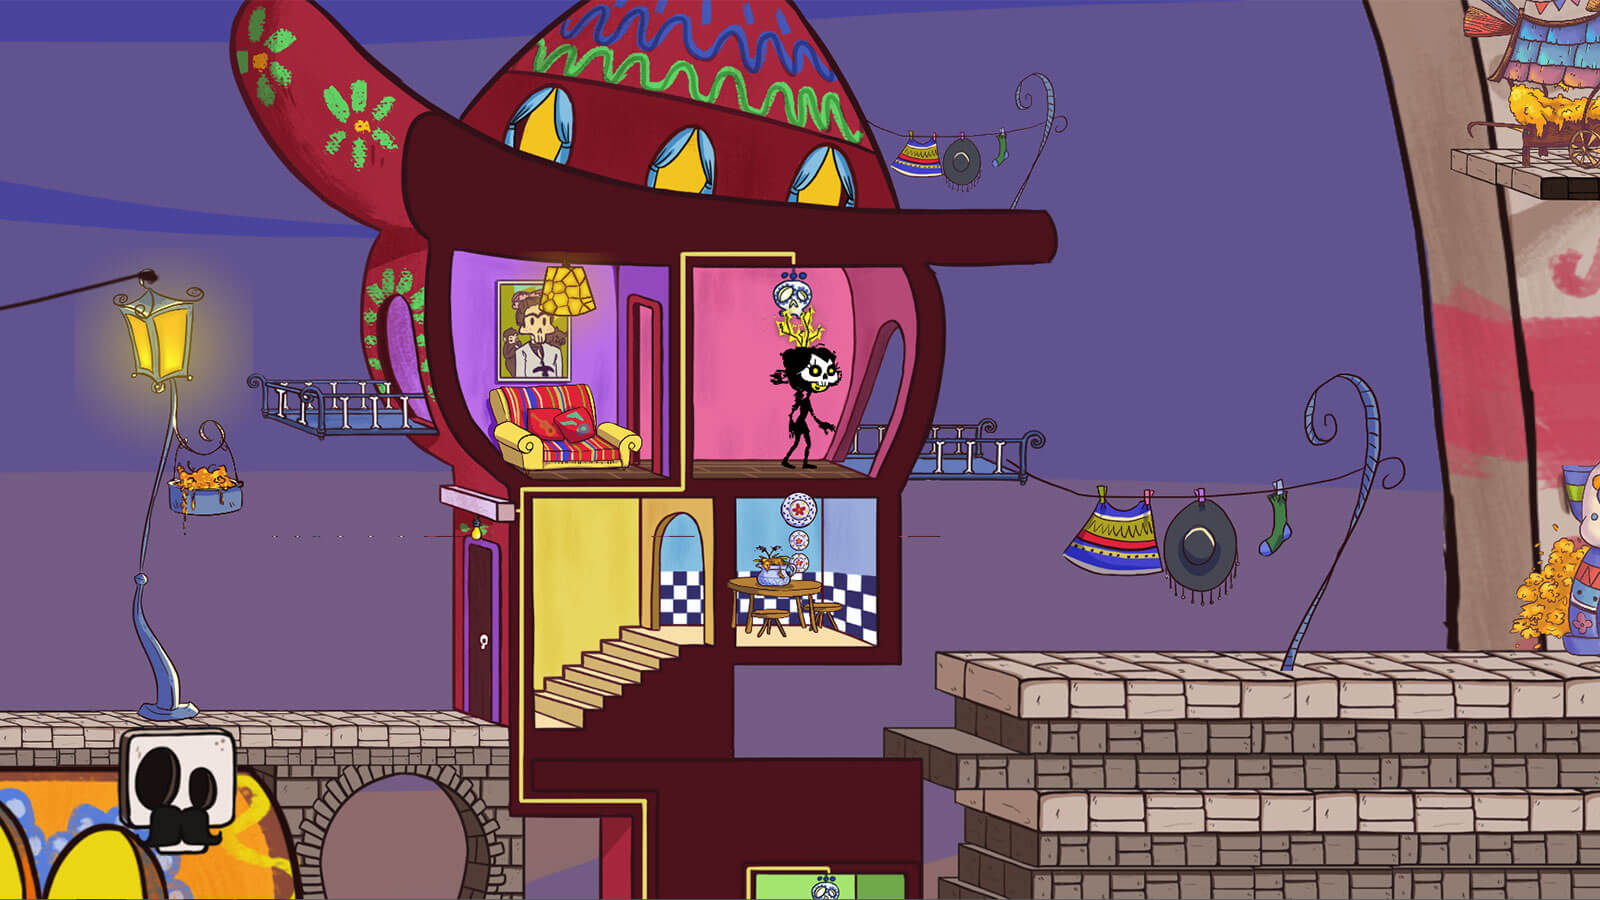 Player stands in small red house with a roof shaped like a hat